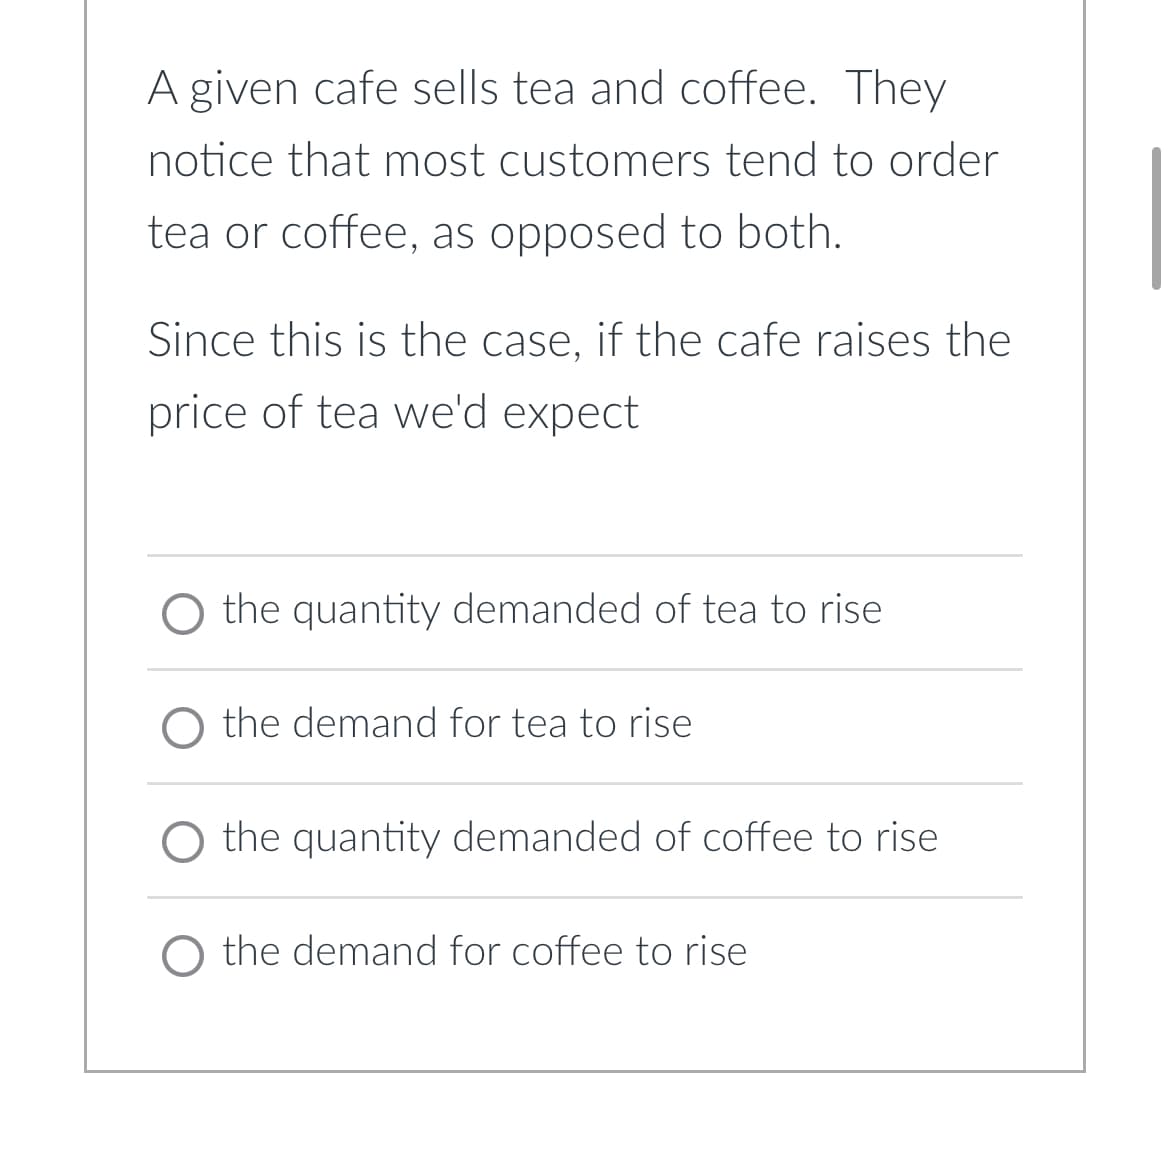 A given cafe sells tea and coffee. They
notice that most customers tend to order
tea or coffee, as opposed to both.
Since this is the case, if the cafe raises the
price of tea we'd expect
O the quantity demanded of tea to rise
O the demand for tea to rise
O the quantity demanded of coffee to rise
O the demand for coffee to rise